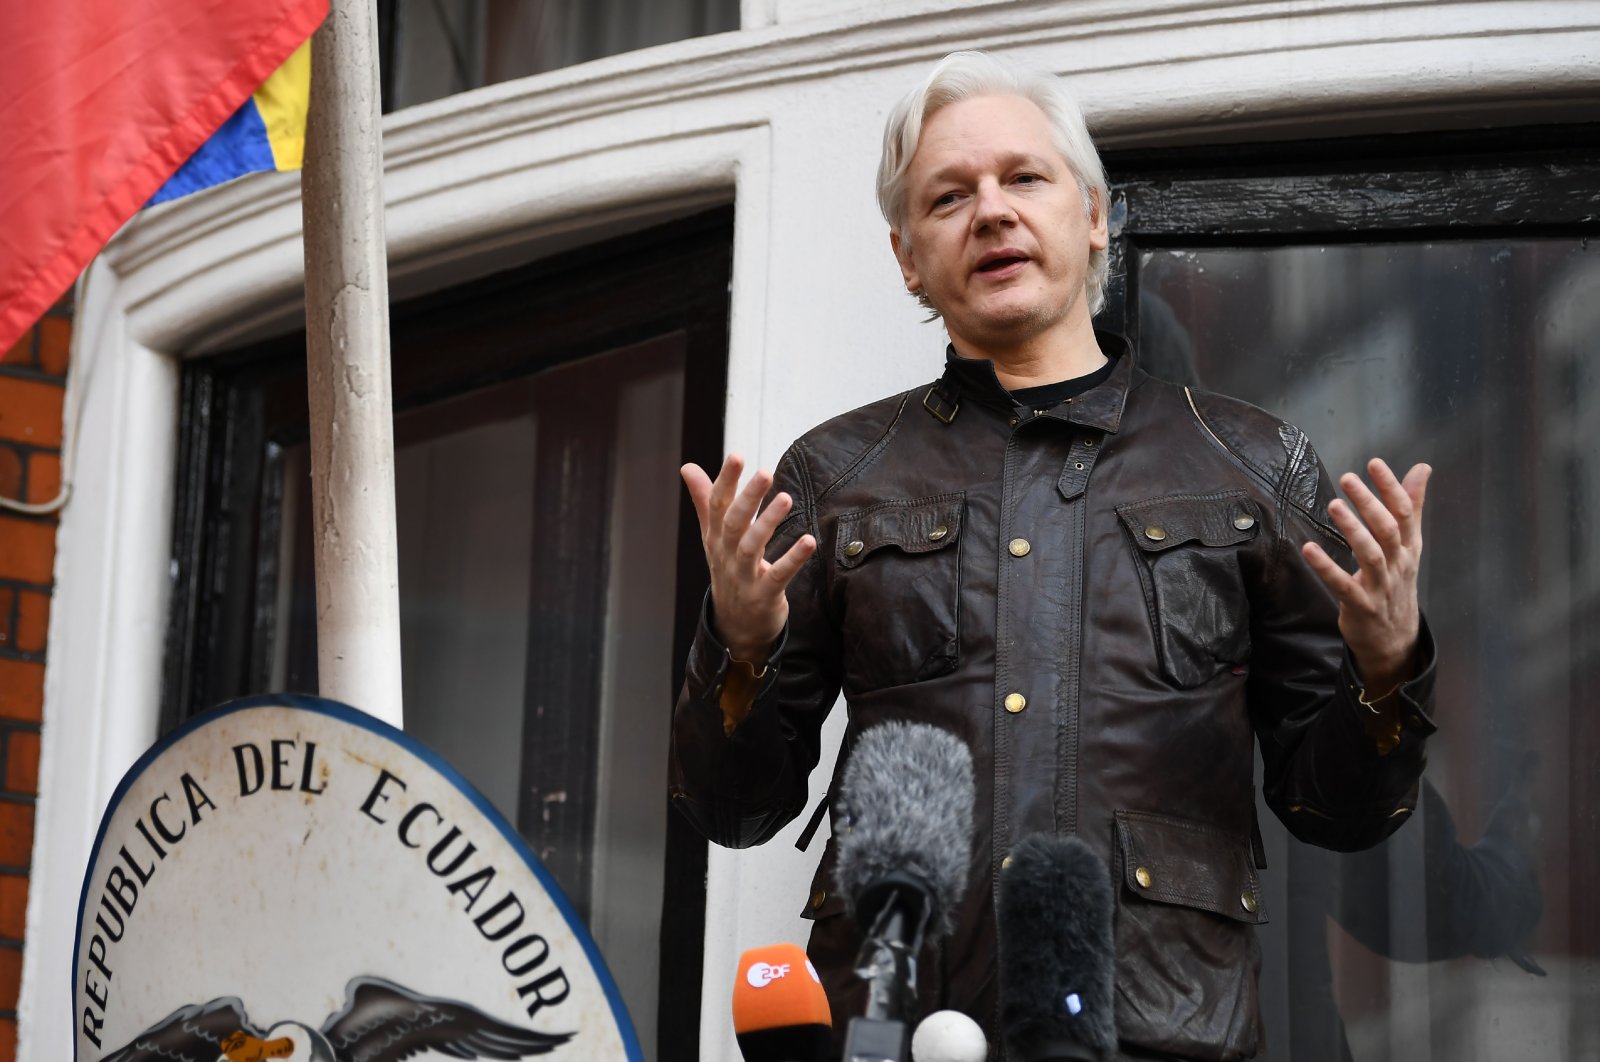 In this file photo taken on May 19, 2017 Wikileaks founder Julian Assange speaks on the balcony of the Embassy of Ecuador in London. (AFP Photo)